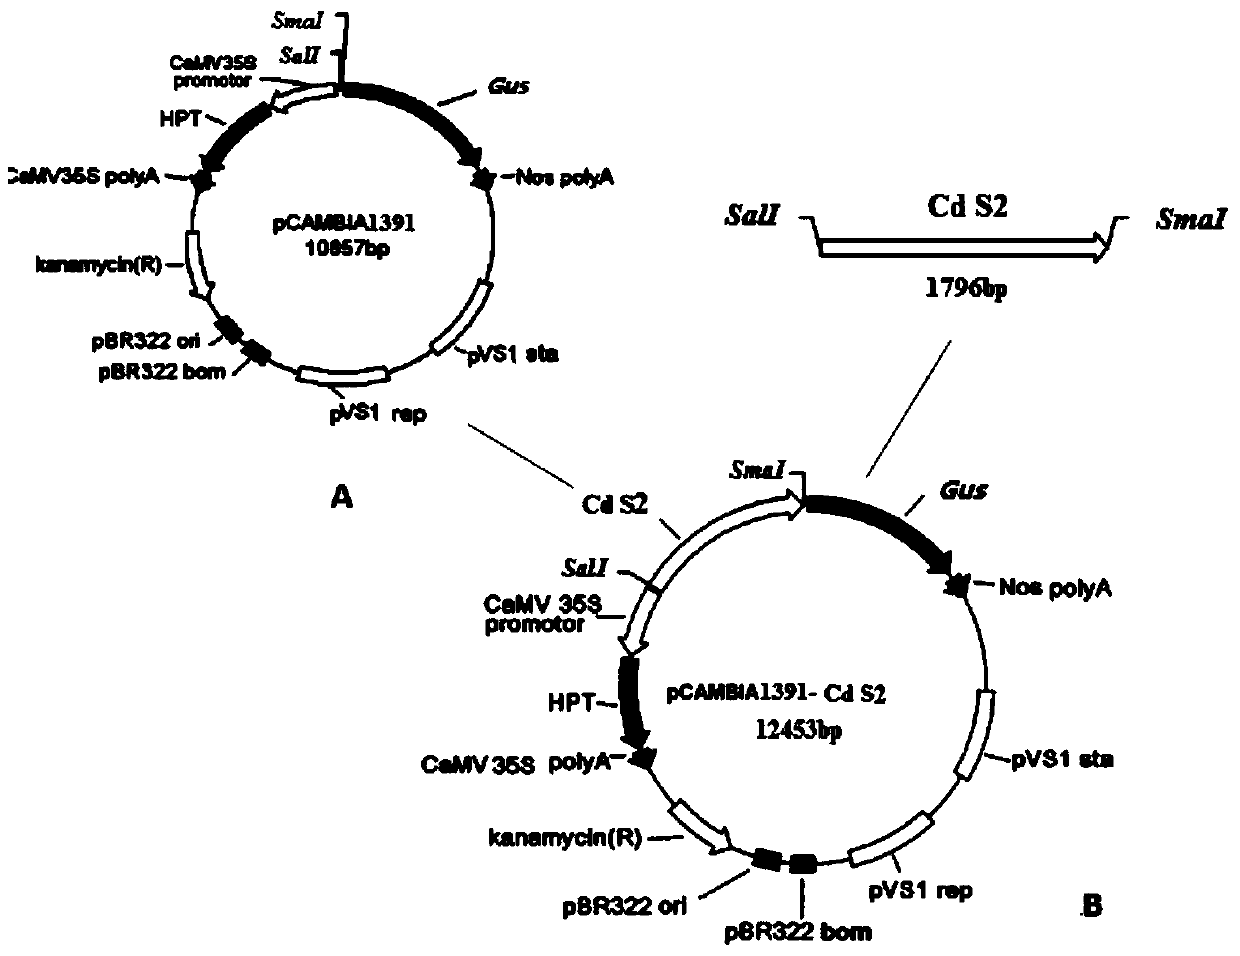 Cadmium strongly inducible promoter cds2 and its application